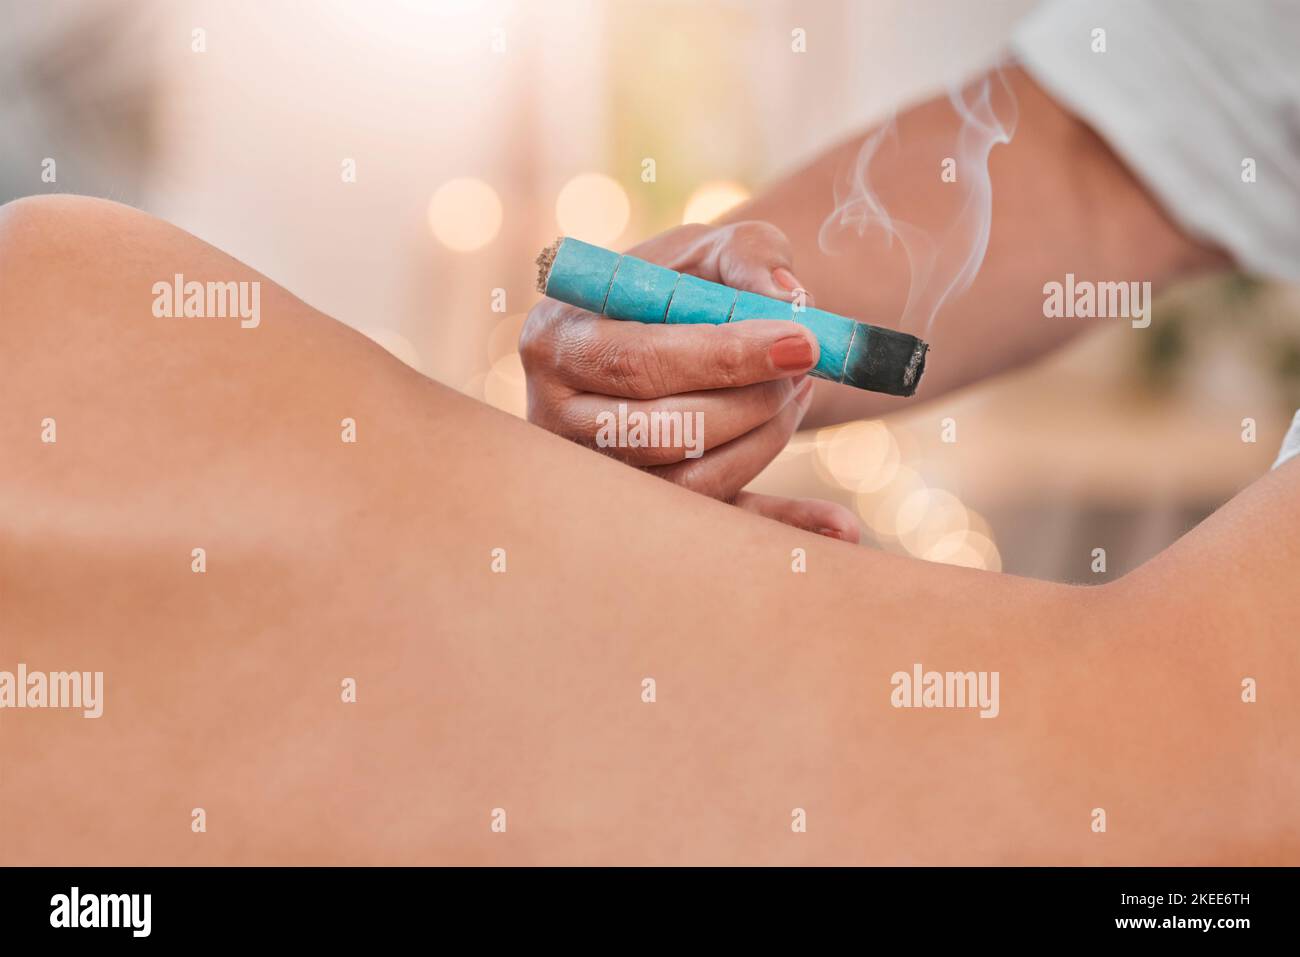 Spa, wellness and moxibustion treatment for body for health, traditional healing and stress relief. Physical therapy, alternative medicine and massage Stock Photo